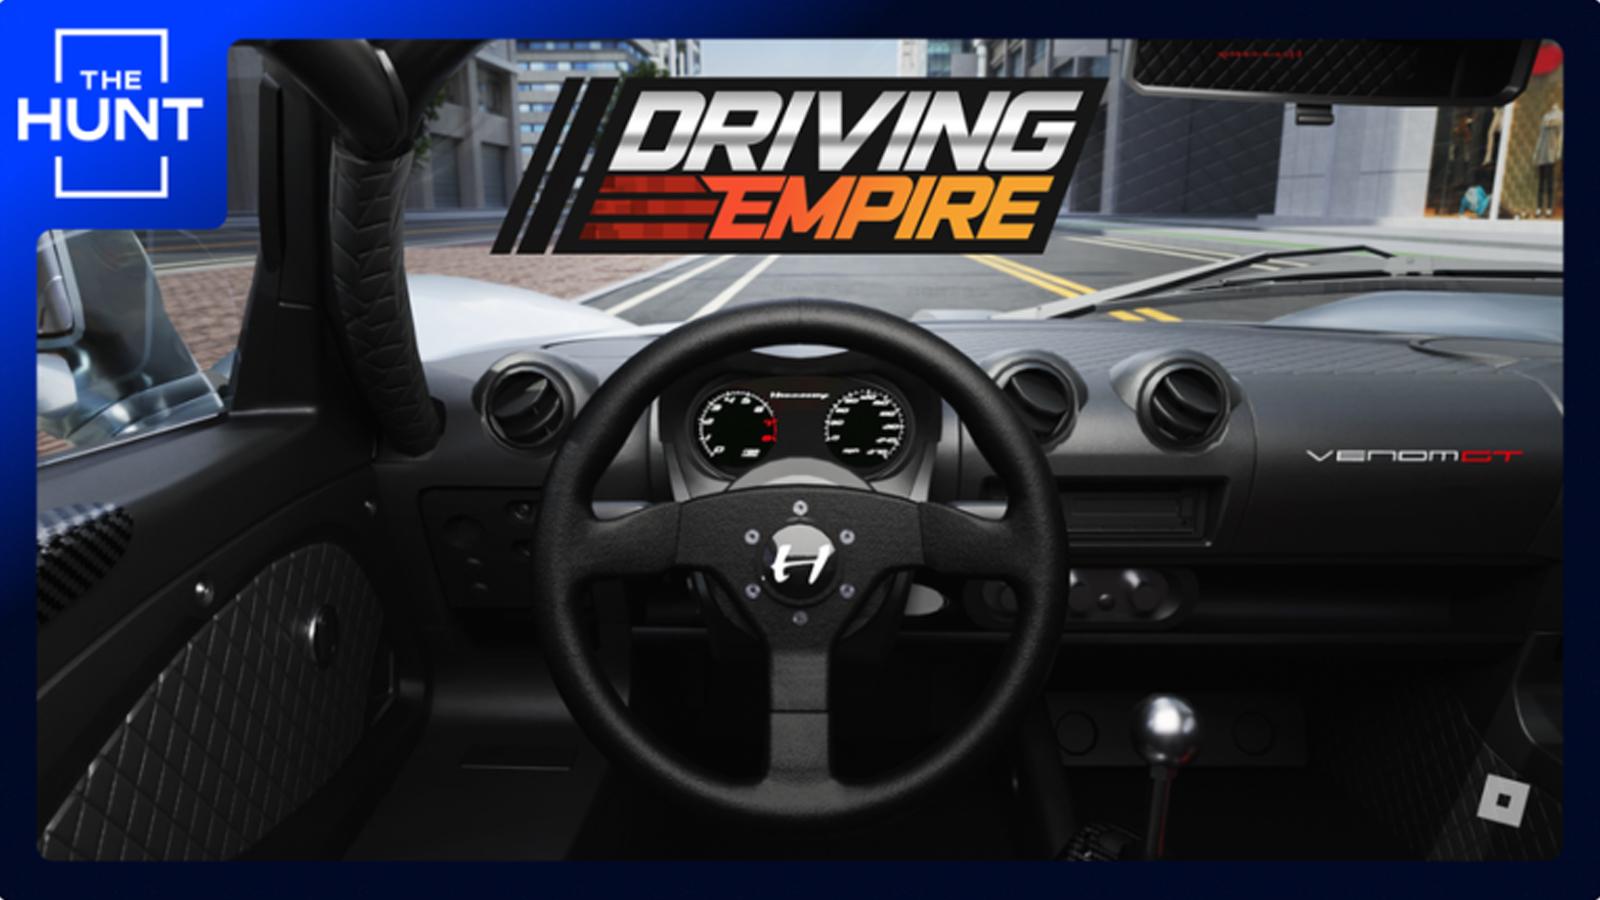 Feature image for how to get The Hunt Driving Empire badge